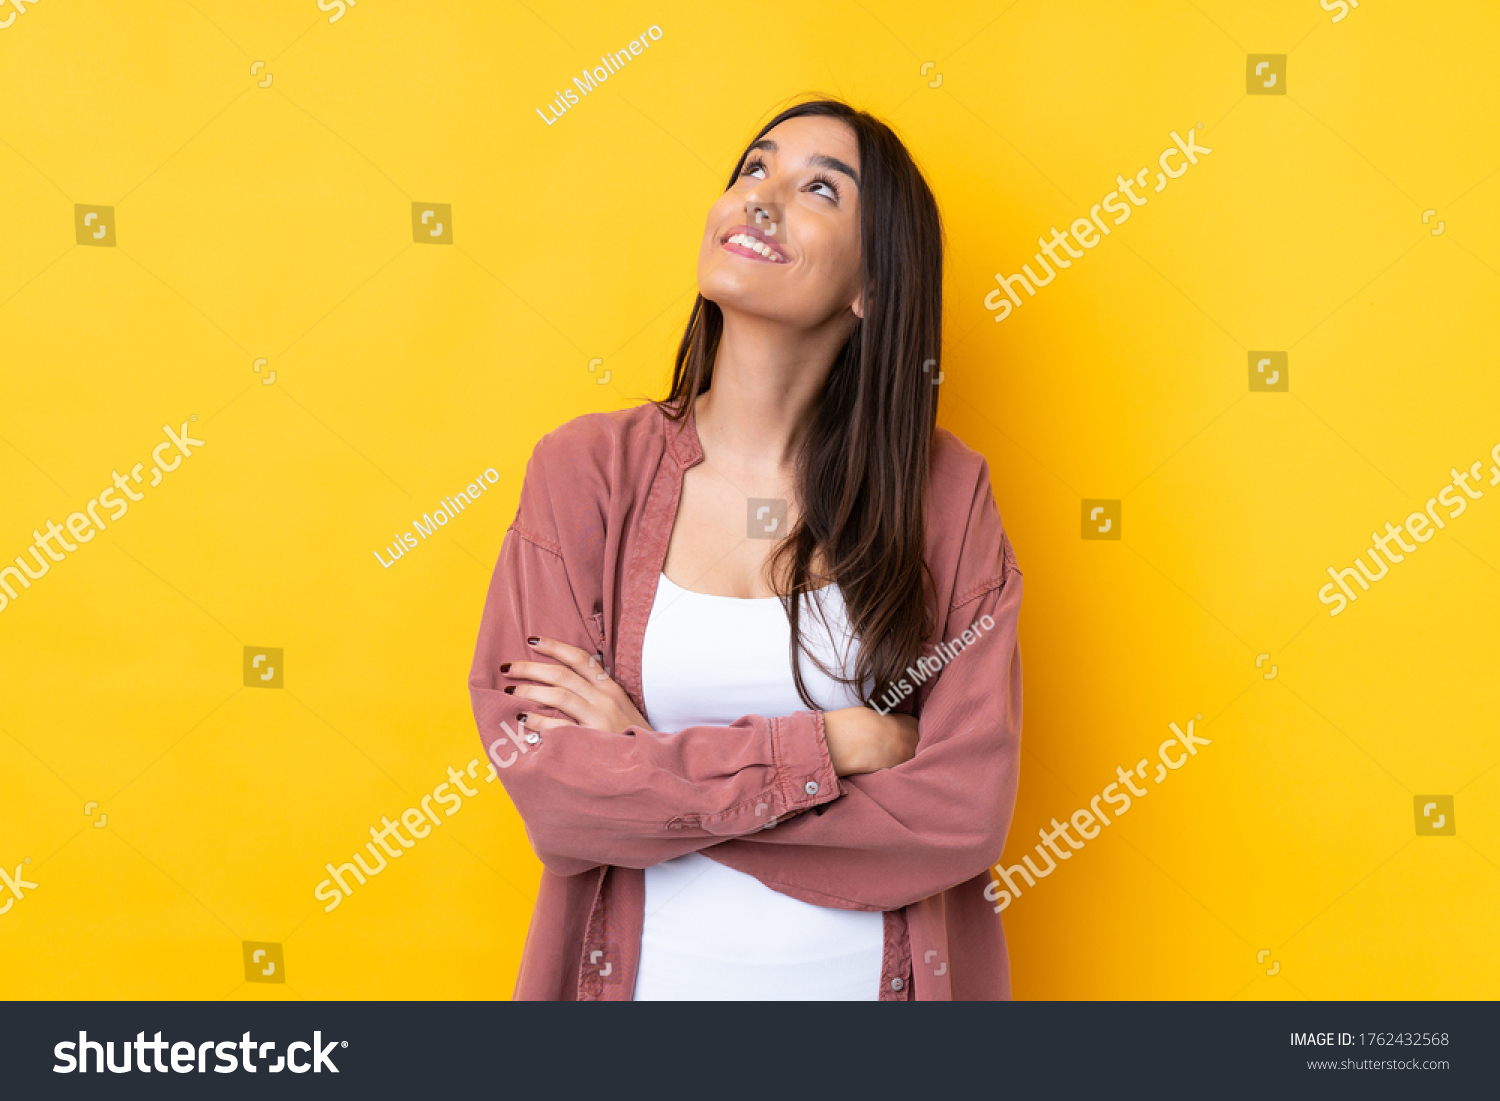 Young brunette woman over isolated yellow background looking up while smiling #1762432568